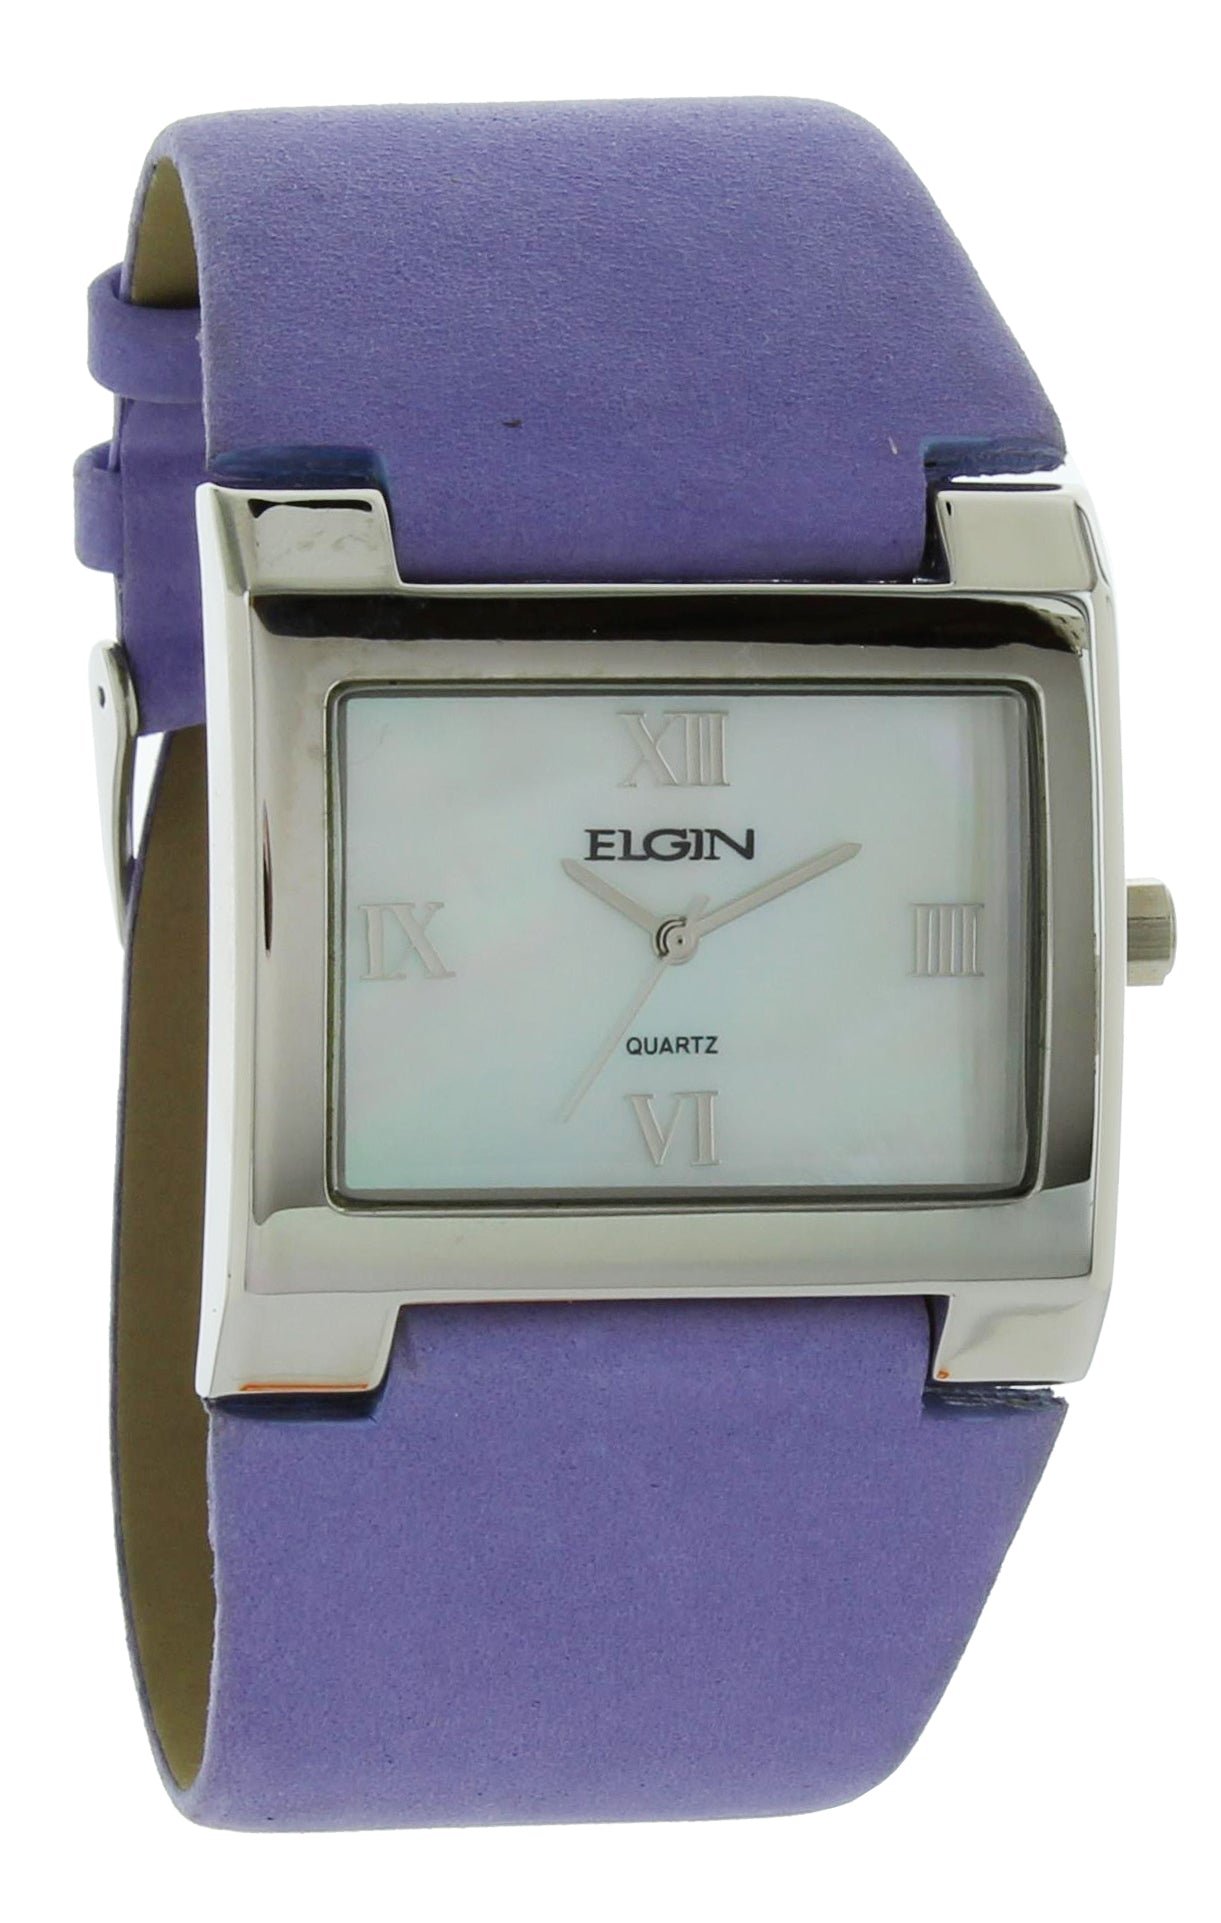 Model: Women's Elgin Watch with Silver Case and White Dial with Light Purple Leather Strap